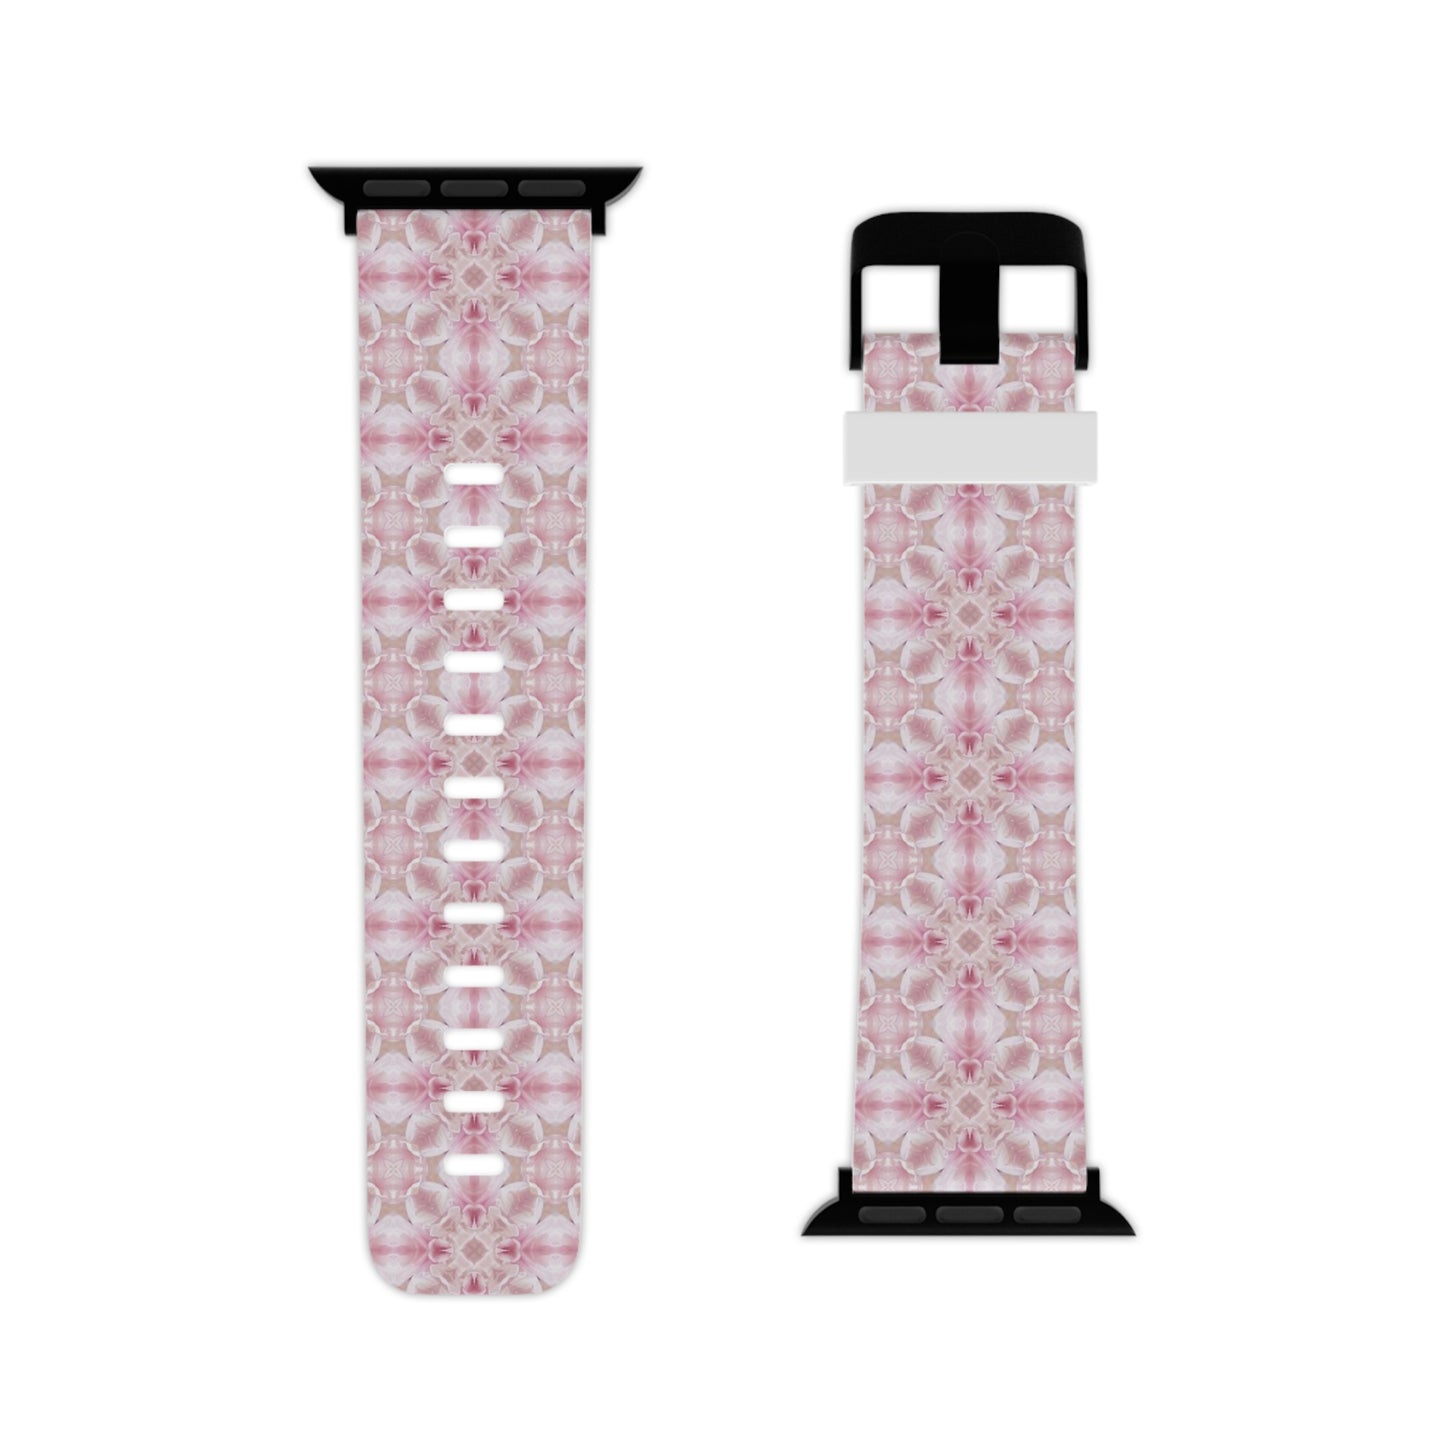 Pink Flower - Watch Band for Apple Watch